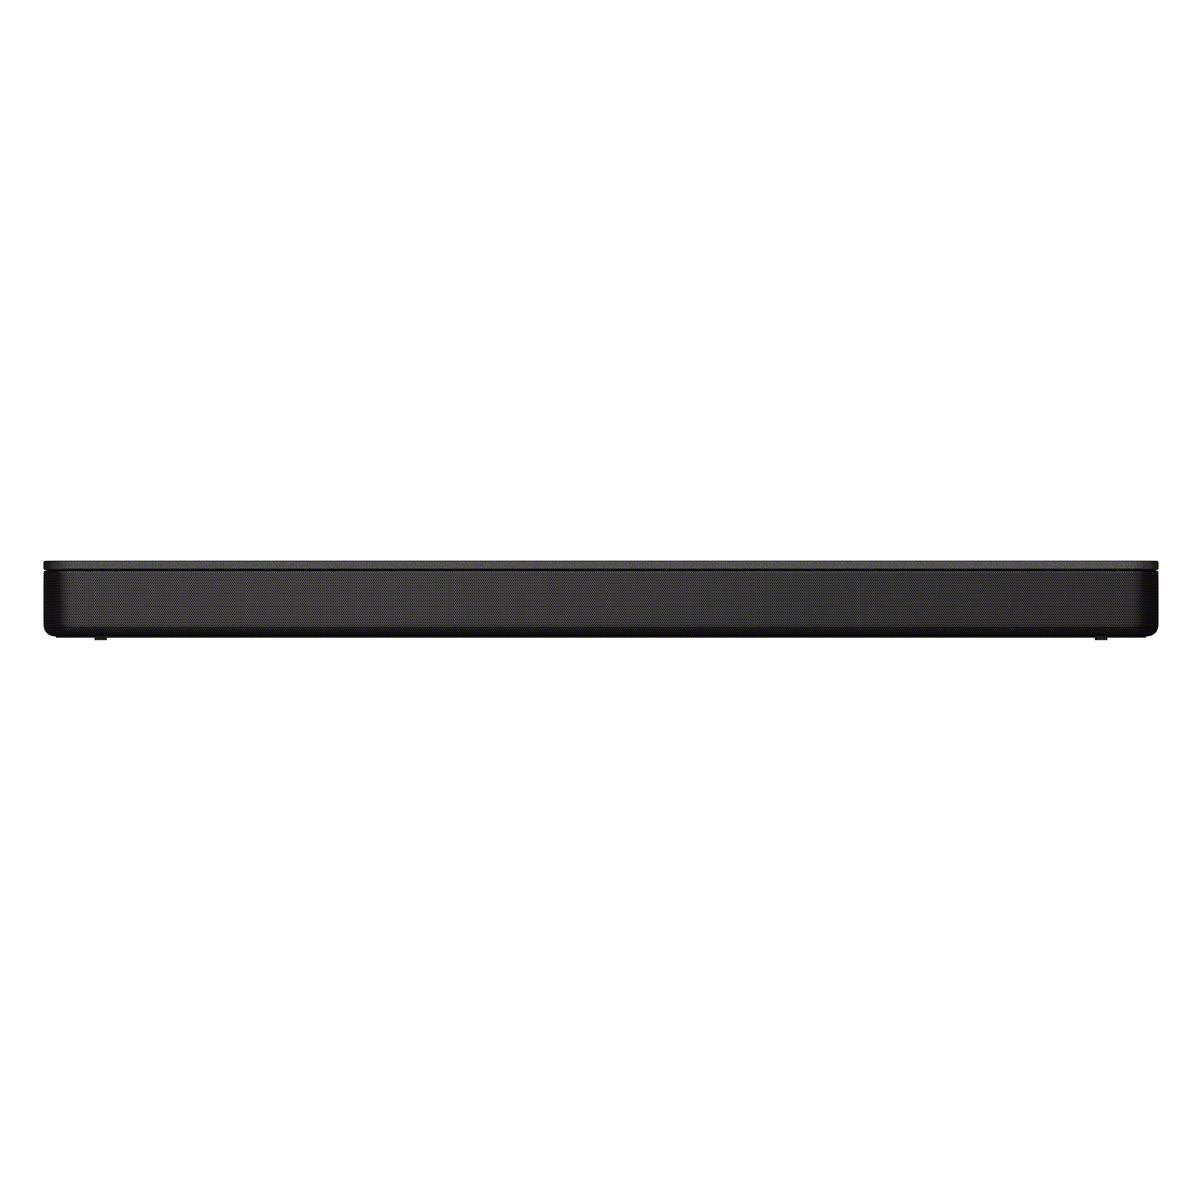 Sony HTS350 2.1 Channel Soundbar with Powerful Wireless Subwoofer and Bluetooth - image 4 of 11